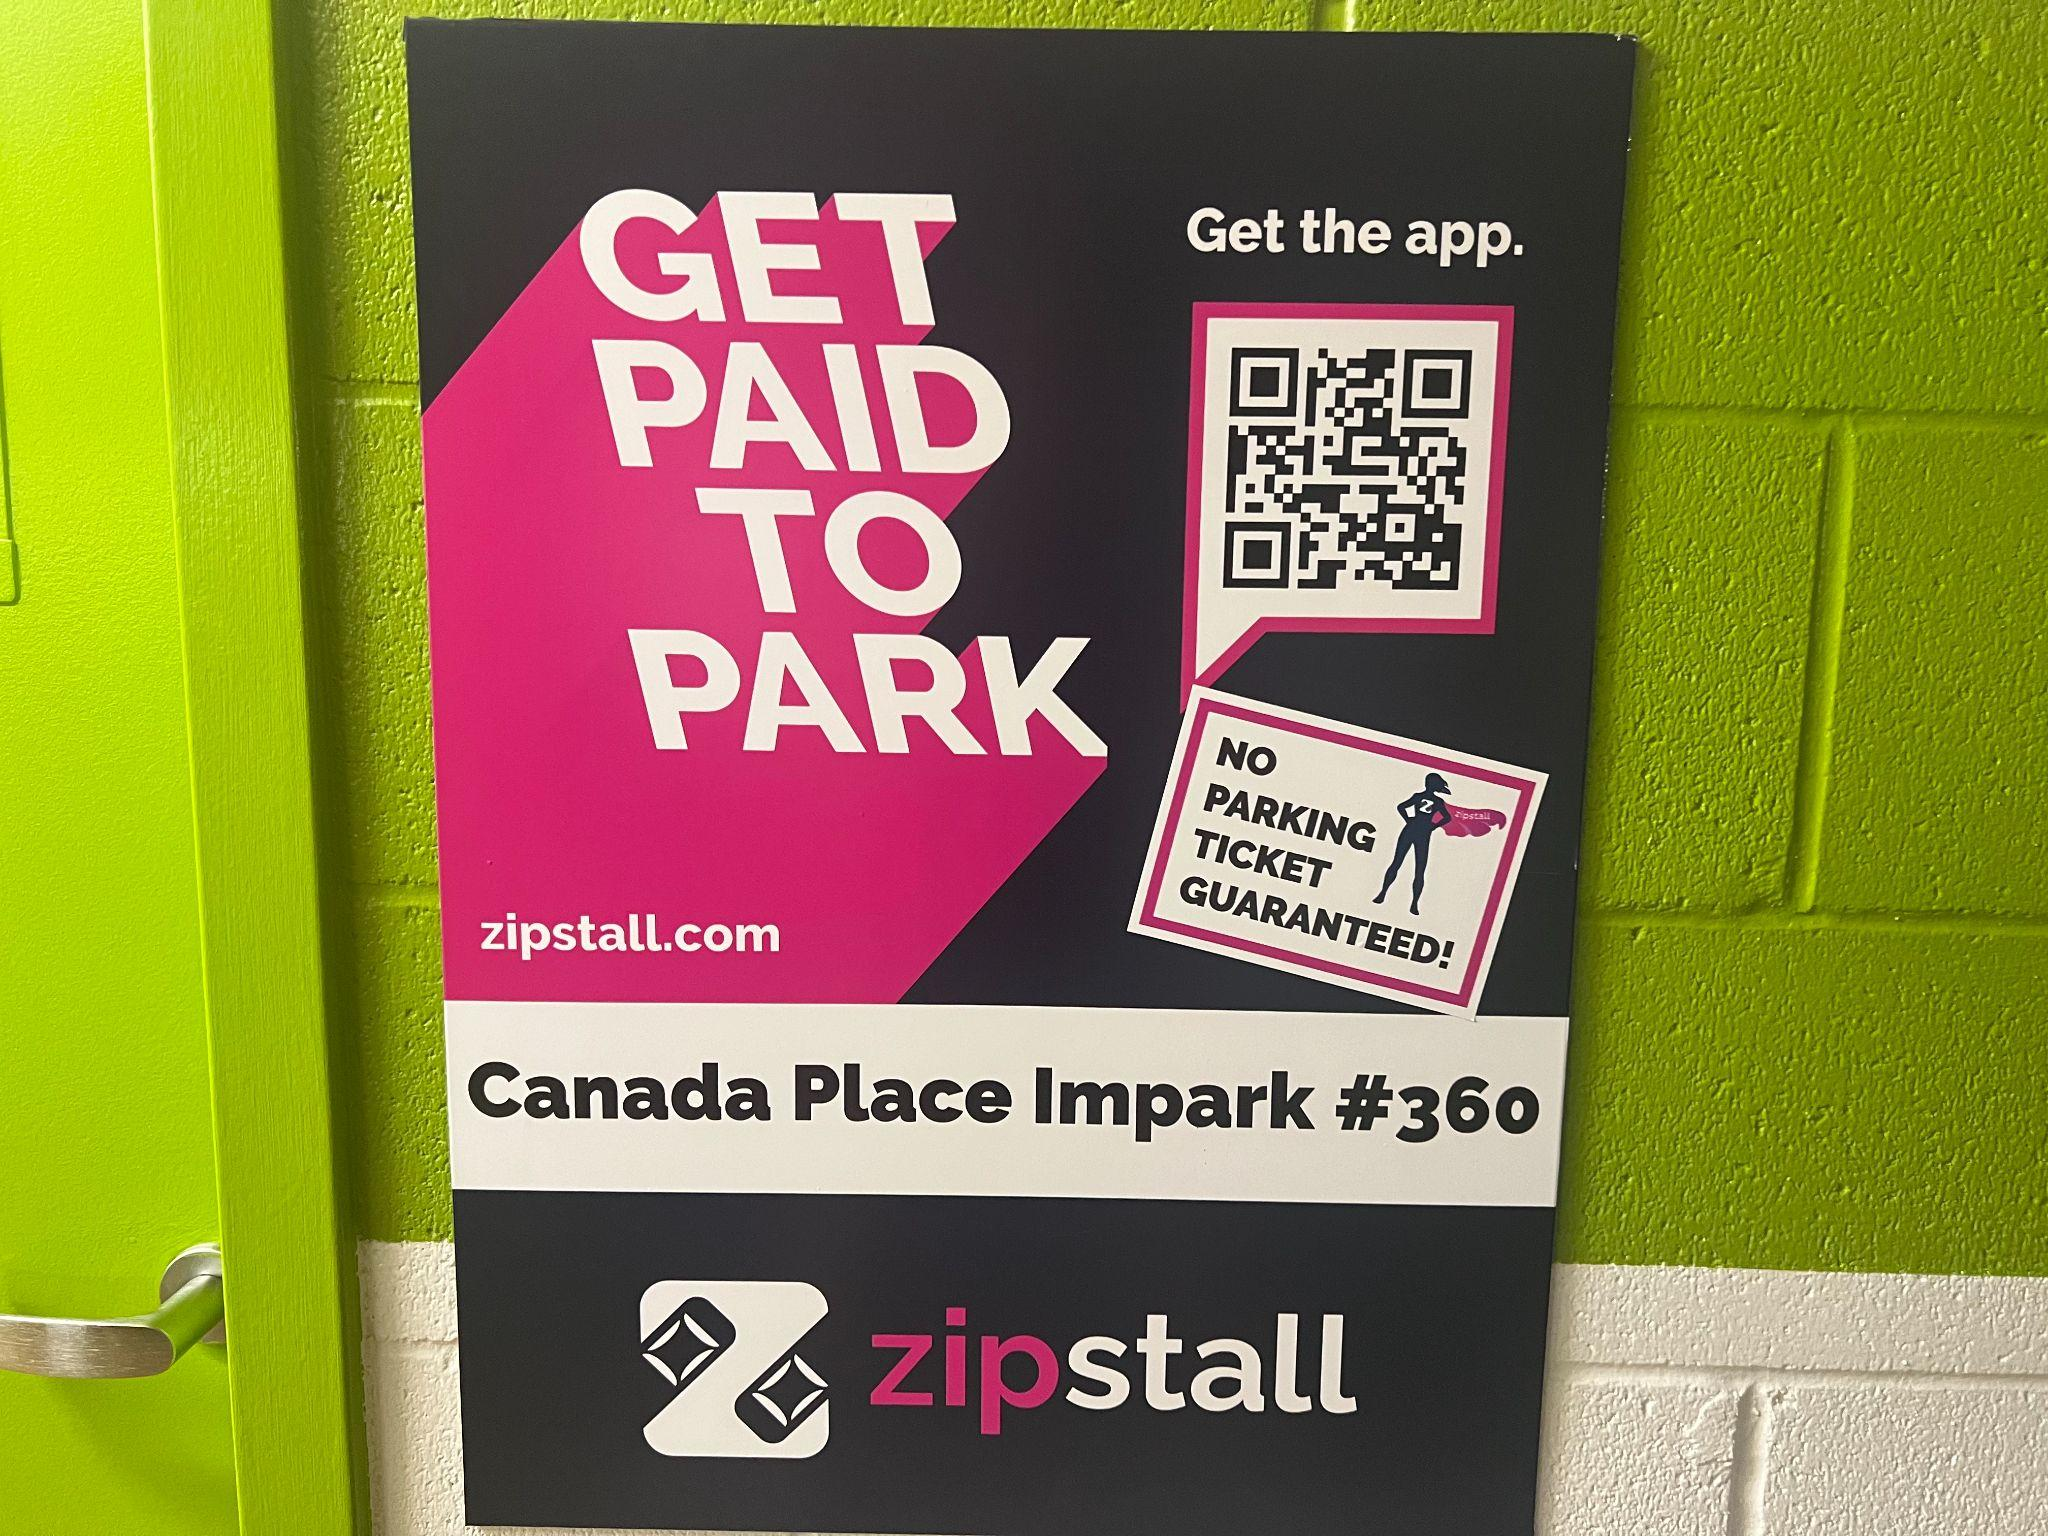  Sign with QR code for Zipstall app in the Canada Place North parkade by the elevators